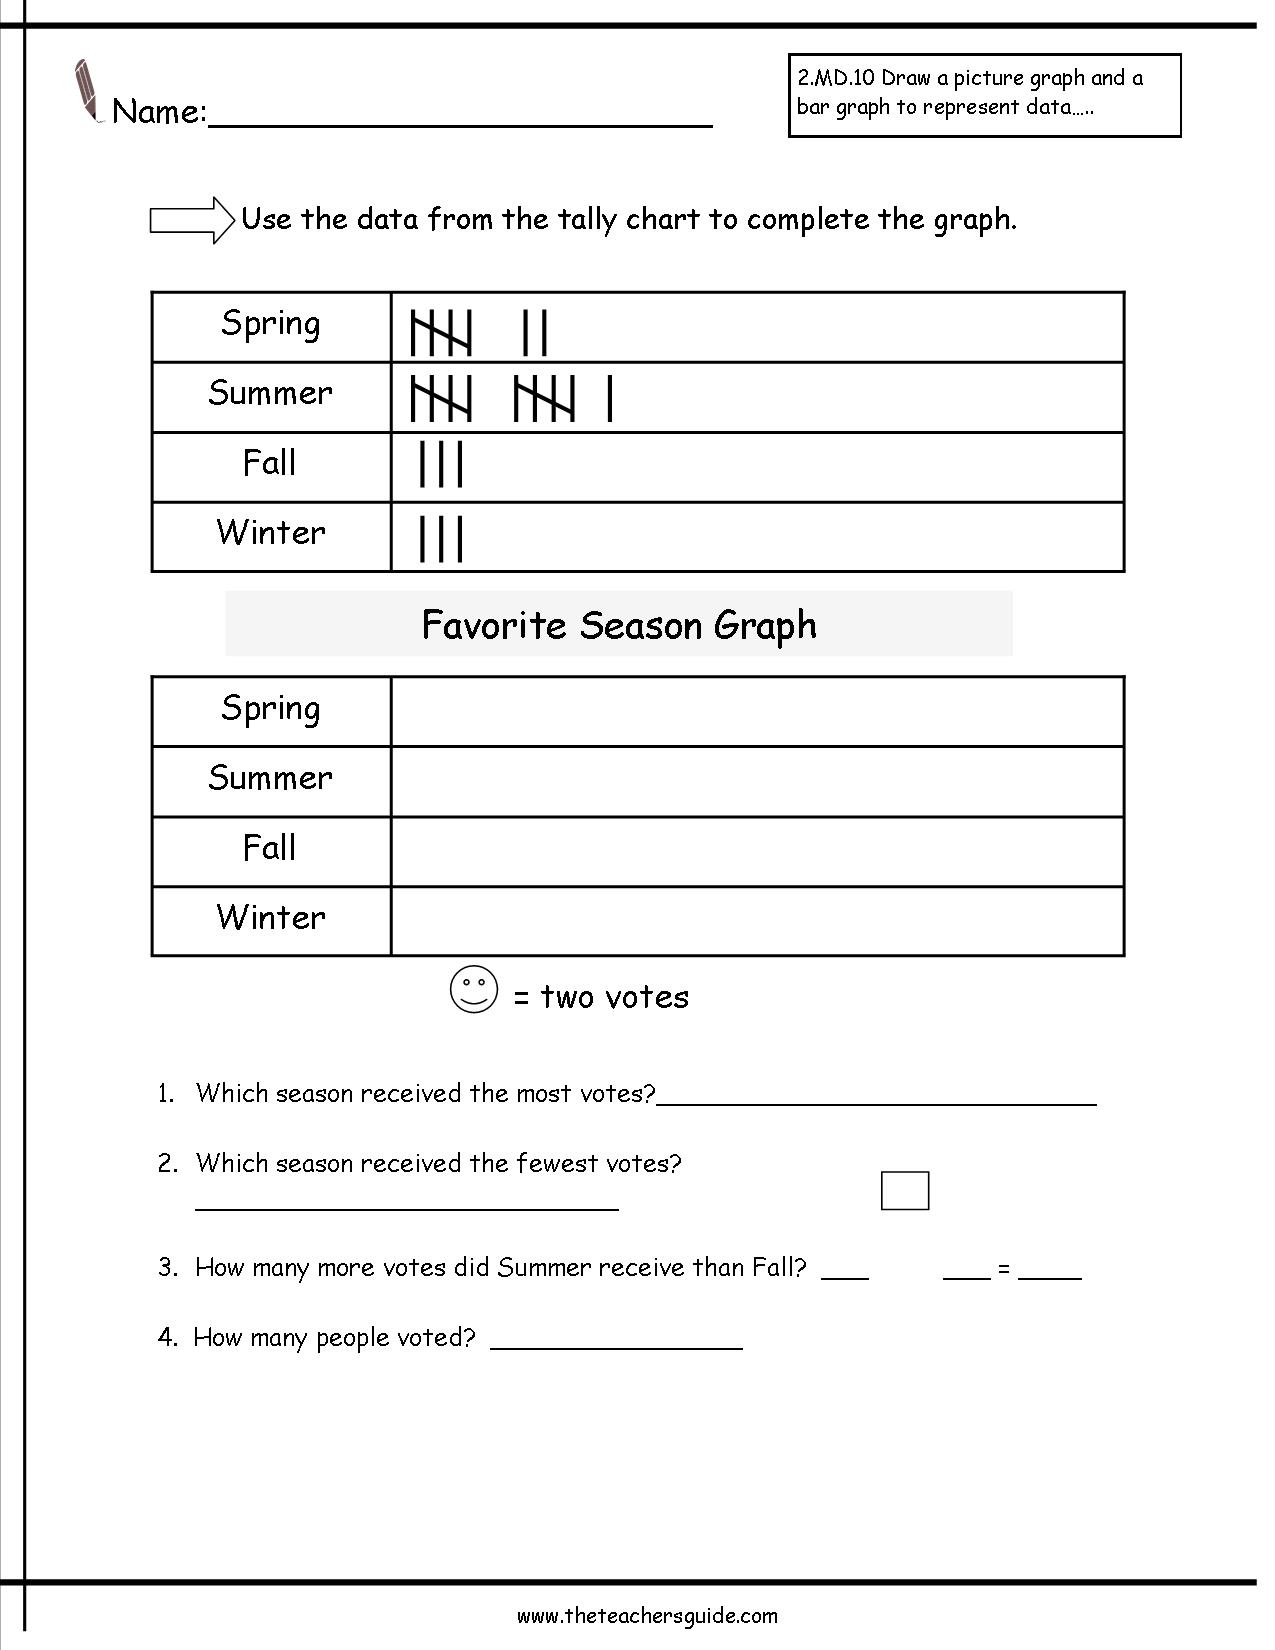 Pictograph Worksheets 2nd Grade